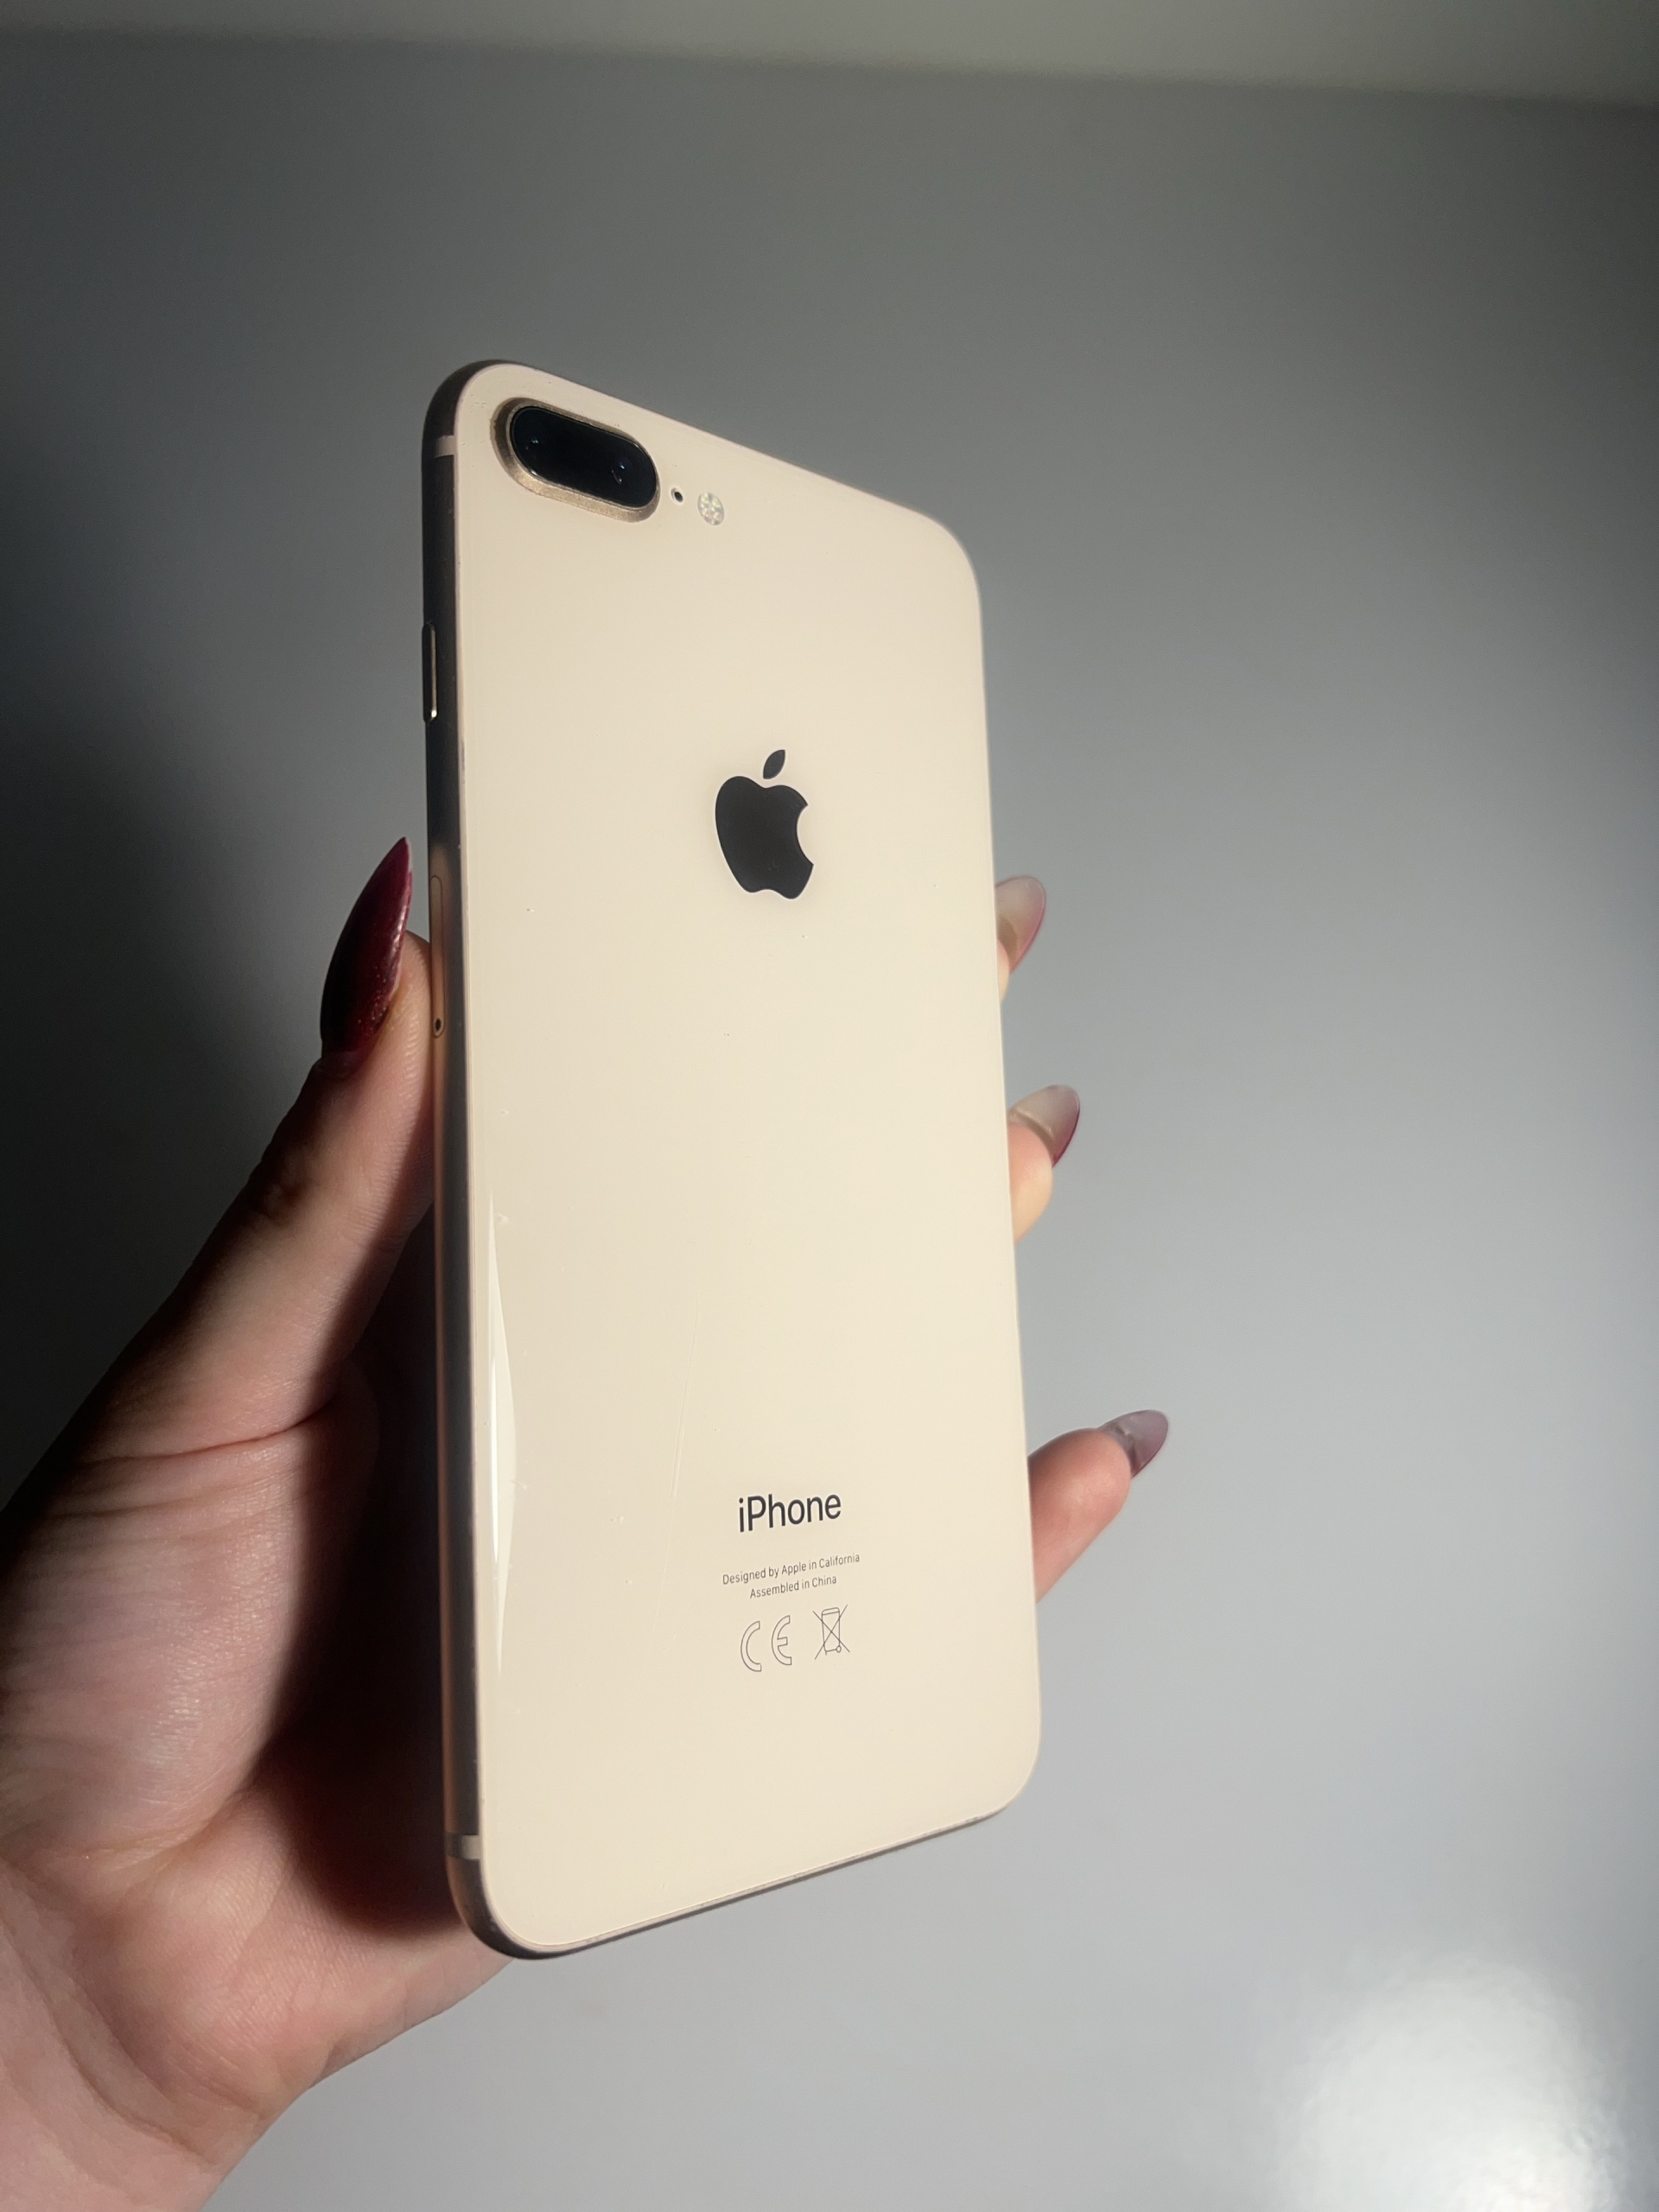 Apple iPhone 8 Plus - 256GB - Rose Gold (Unlocked) from Japan